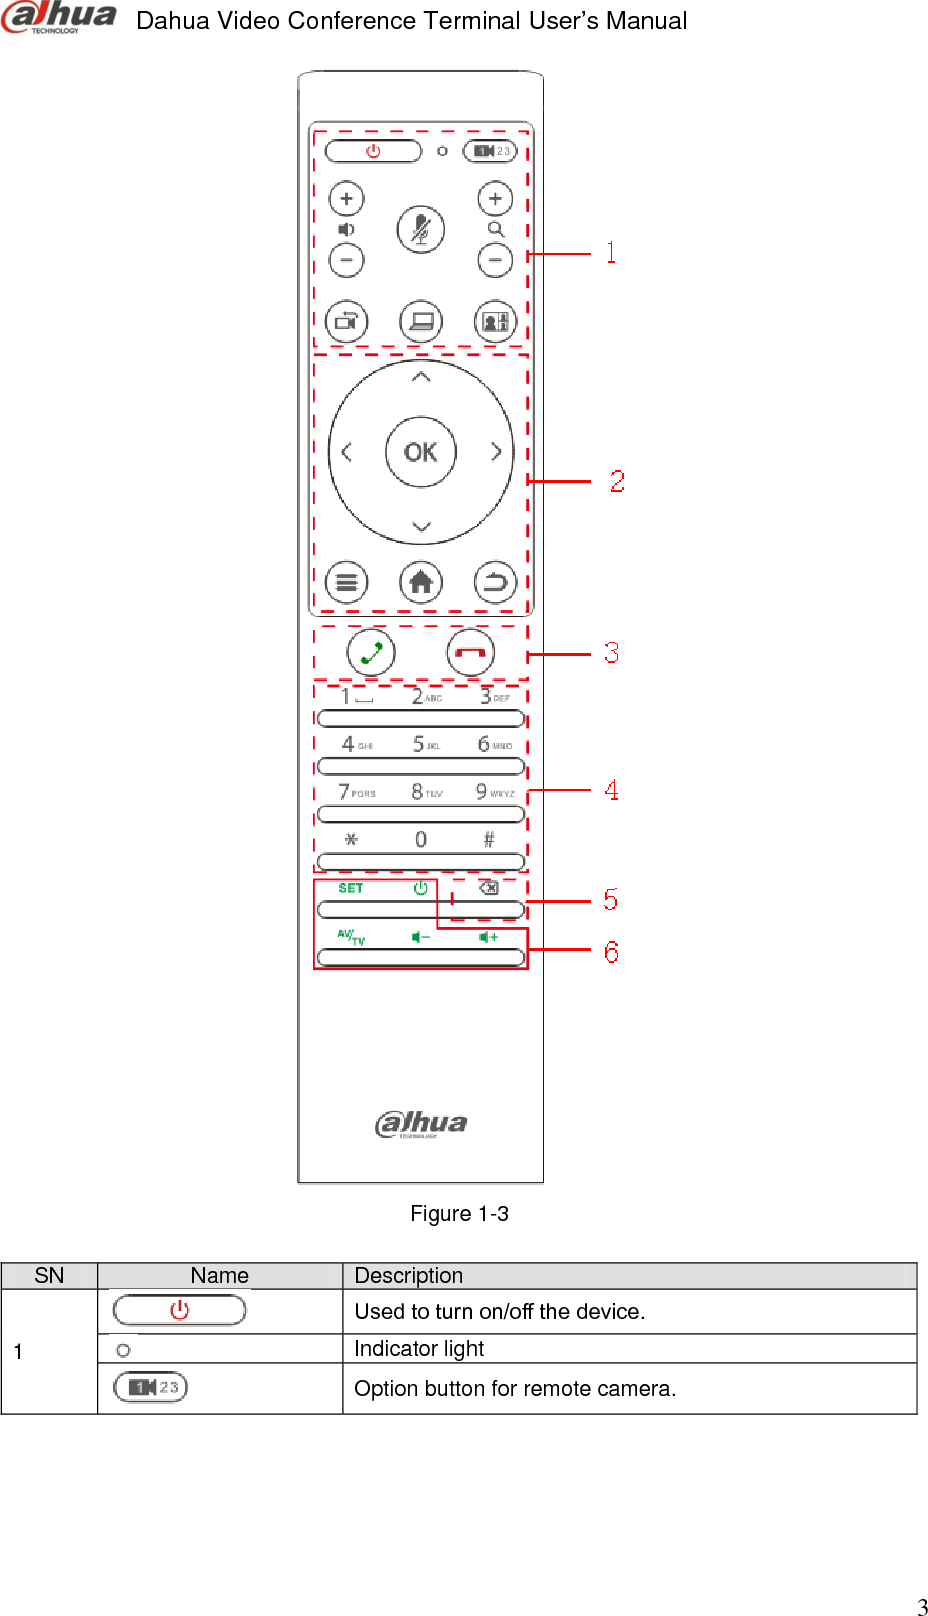  Dahua Video Conference Terminal User’s Manual                                                                              3  Figure 1-3  SN Name Description 1  Used to turn on/off the device.  Indicator light  Option button for remote camera. 